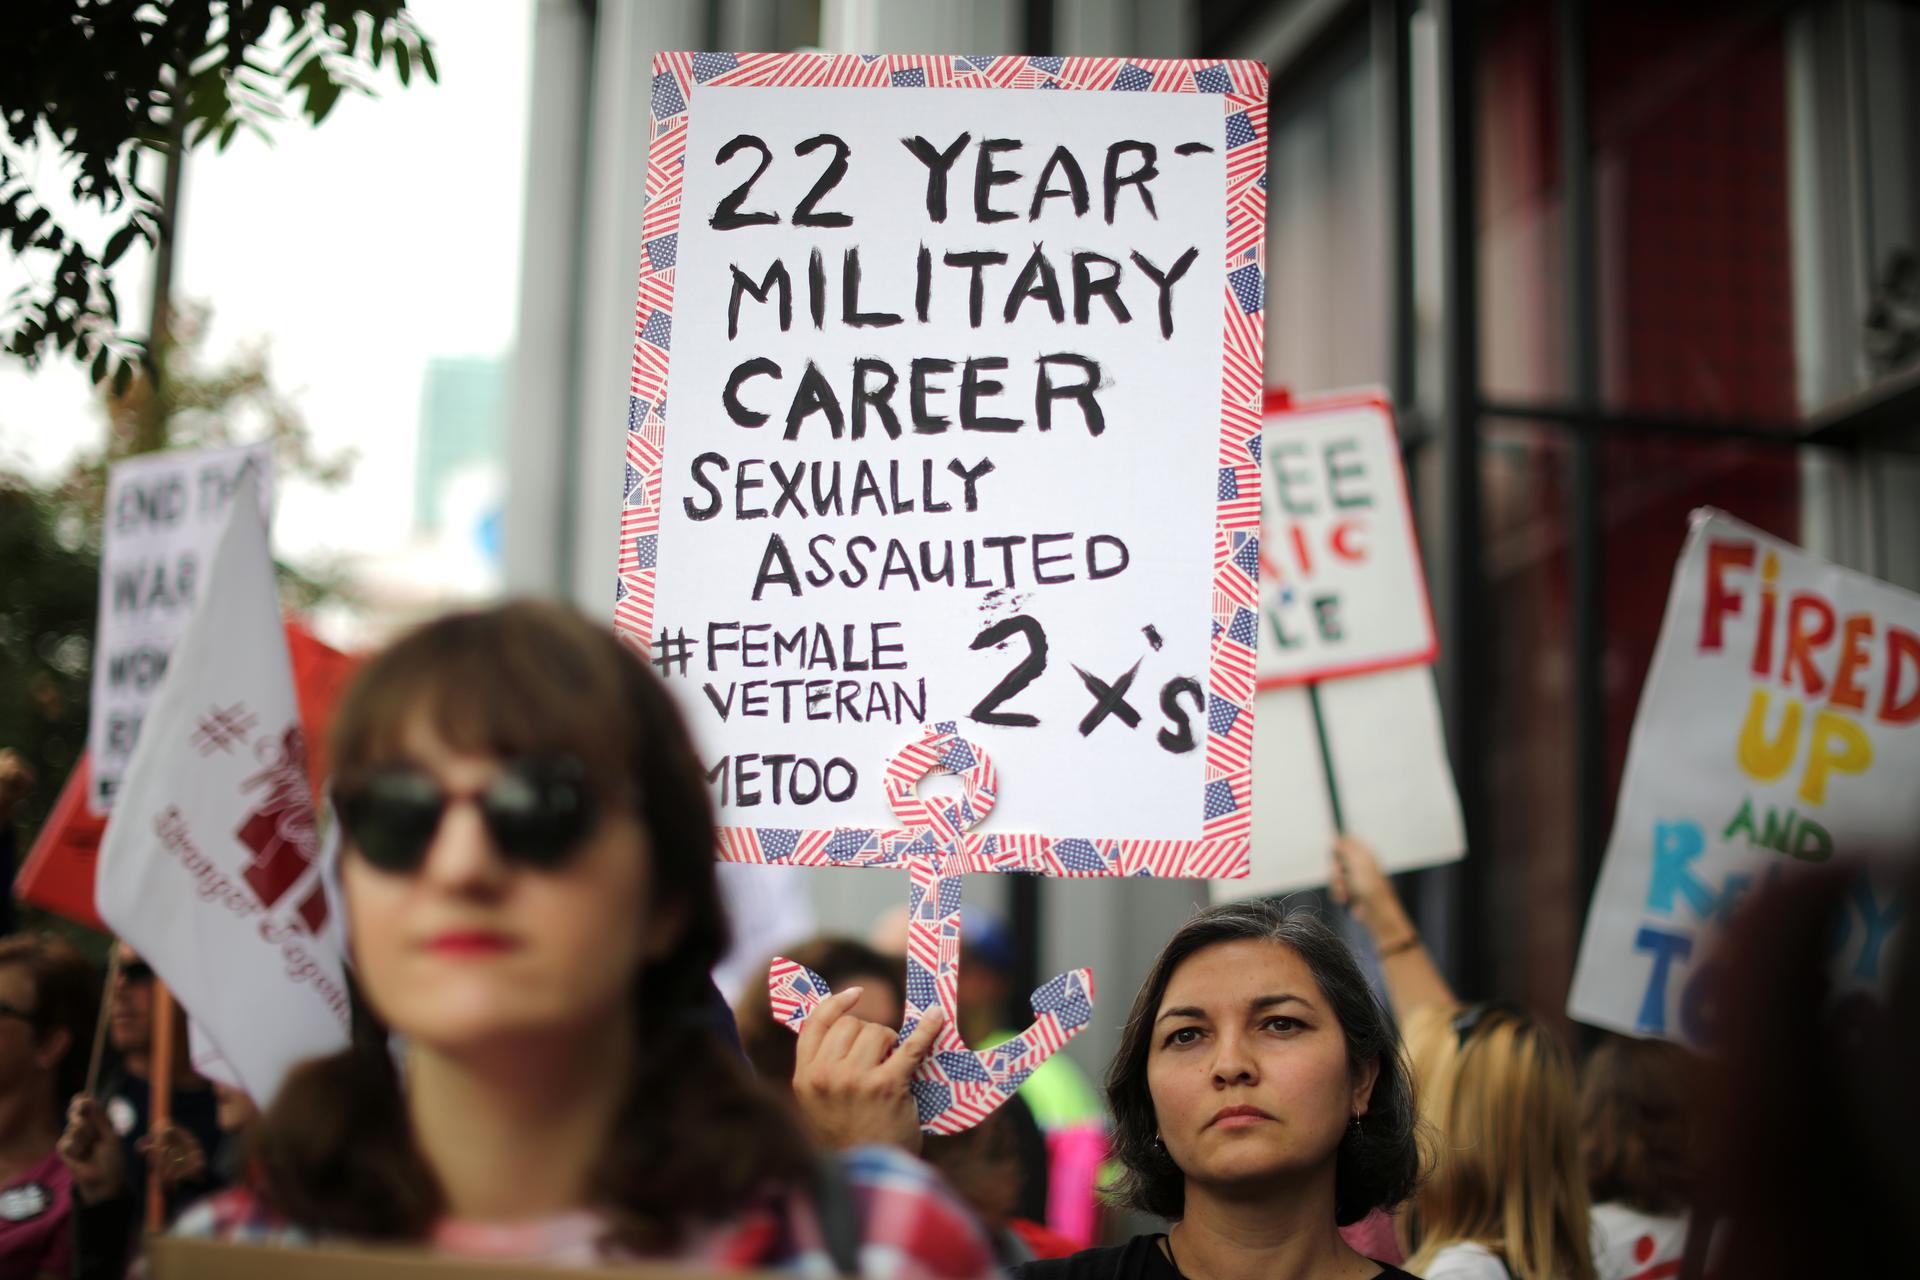 Women in the US military want their voices added to the #MeToo movement.  Women vets say sexual assault and harassment are rarely reported out of fear of retribution.